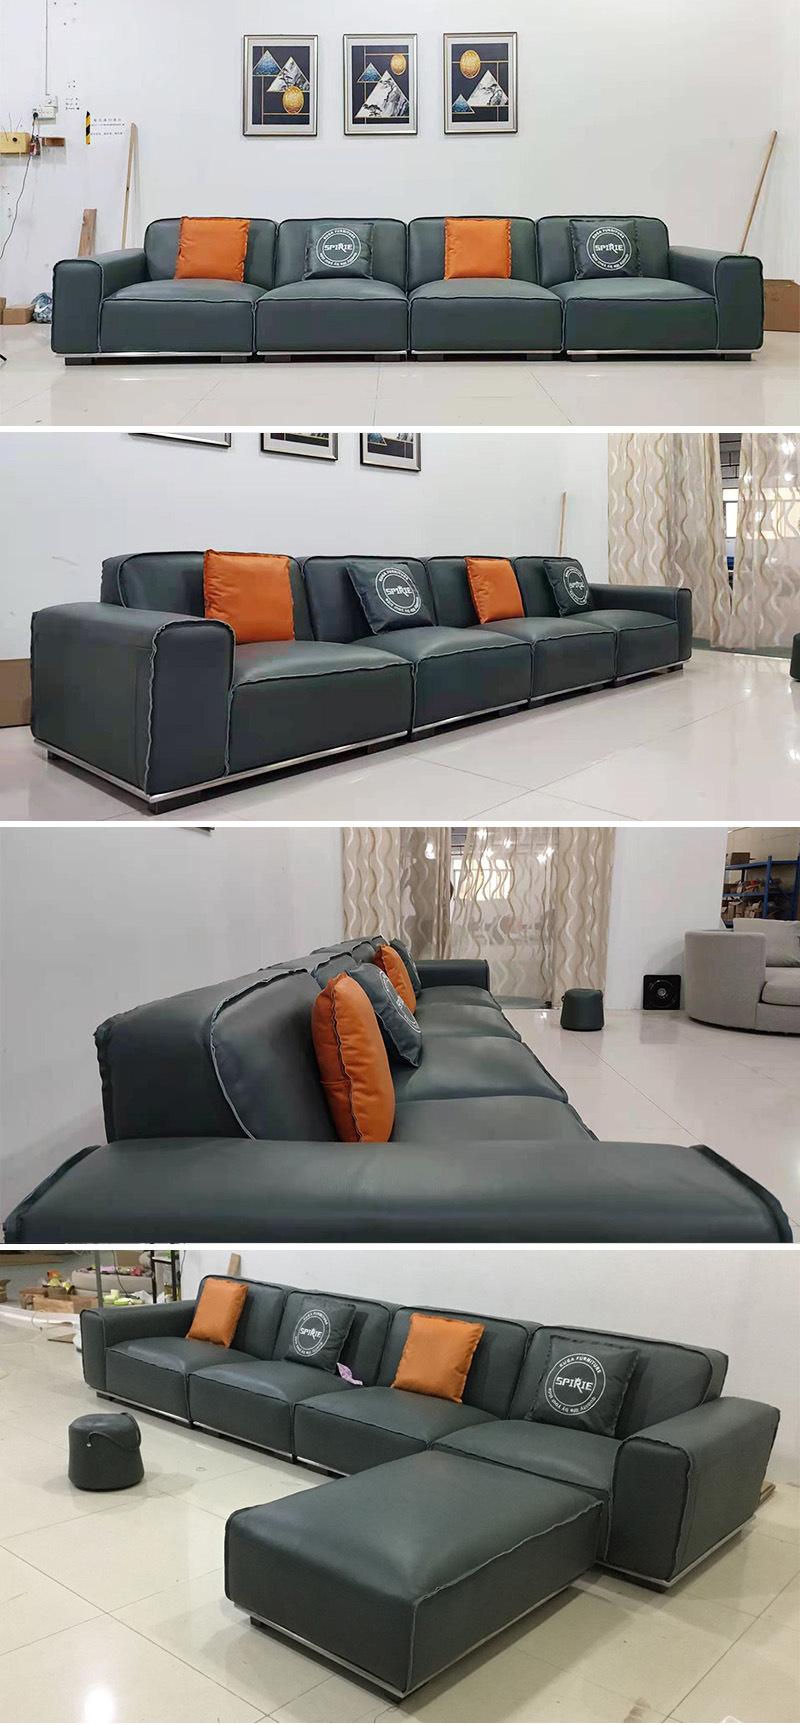 Contemporary Leisure Fabric Sofa Modern Leather Couch Home Furniture for Living Room Set 2827